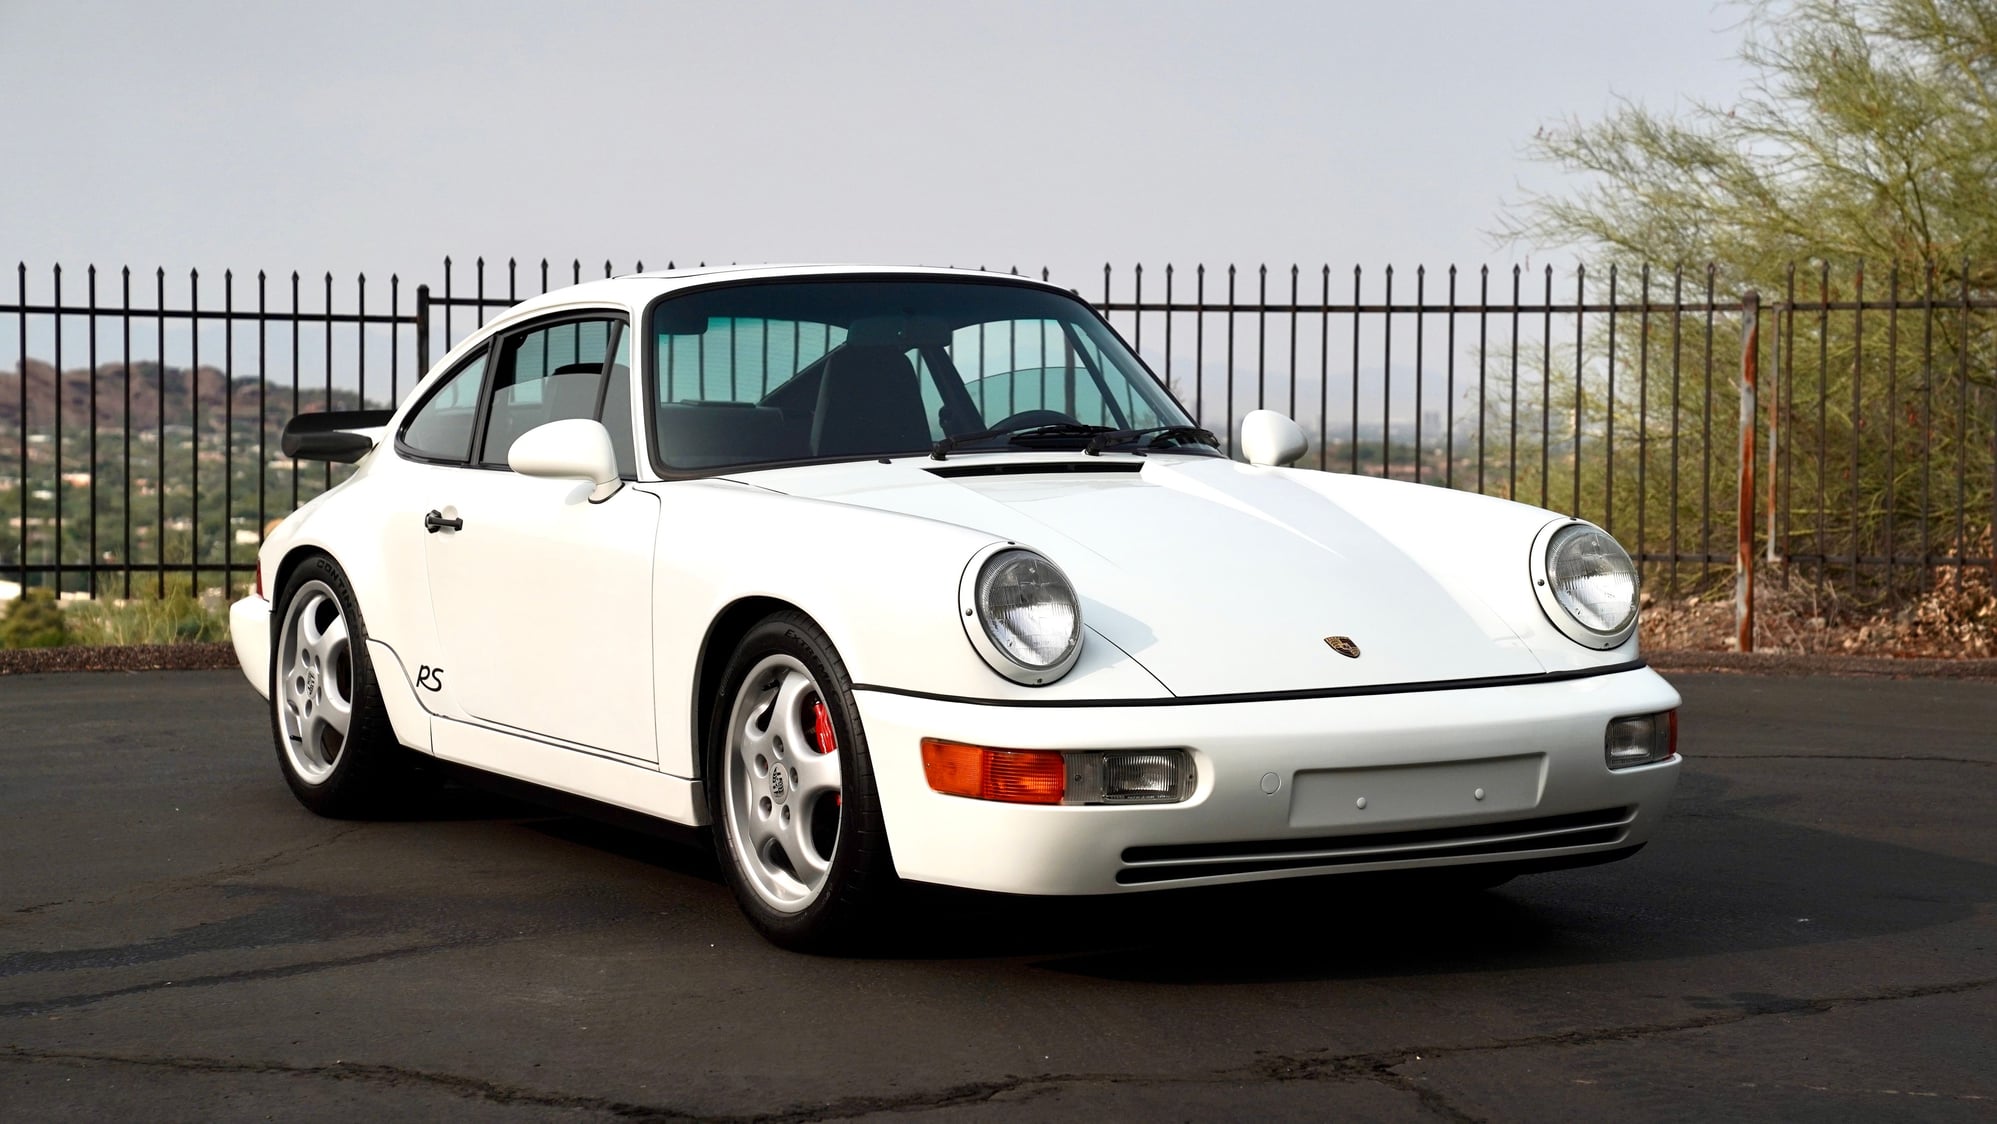 1993 Porsche 911 - 1993 RS America - Used - VIN WP0AB2969PS419321 - 94,600 Miles - 6 cyl - 2WD - Manual - Coupe - White - Phoenix, AZ 85013, United States